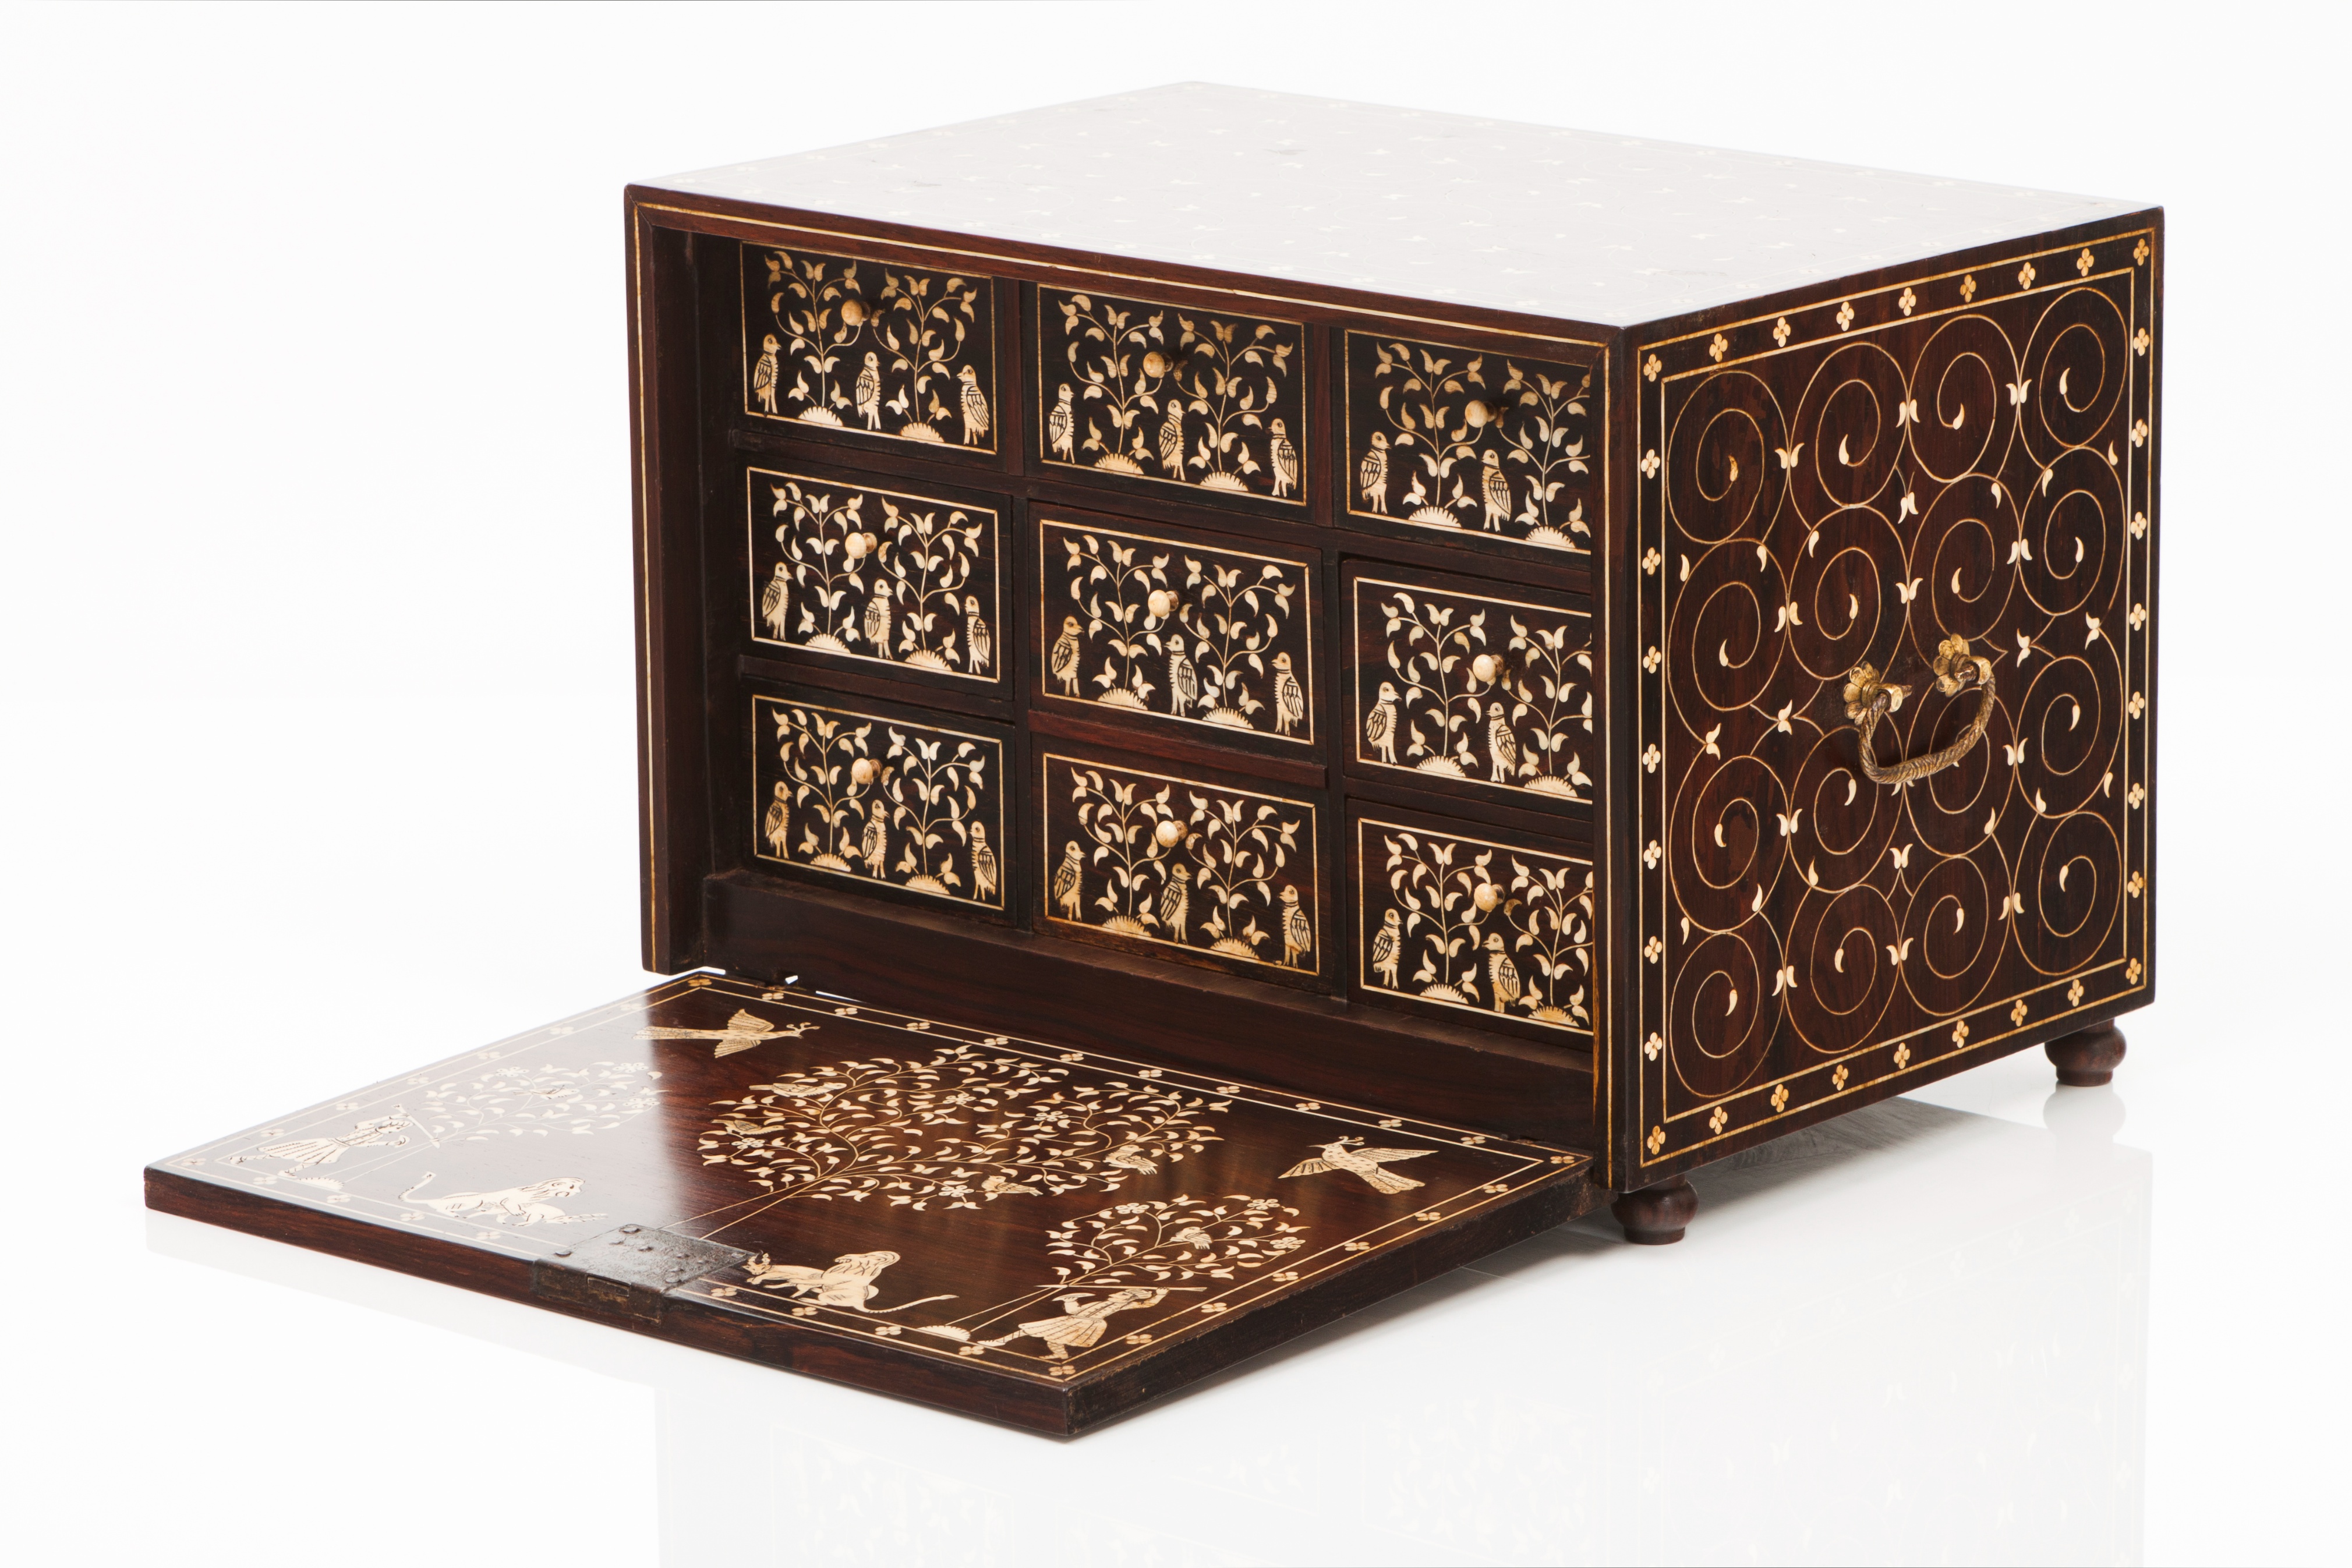 A small cabinetFall front teak and ebony cabinet Ivory inlaid of floral friezes, Indian figures